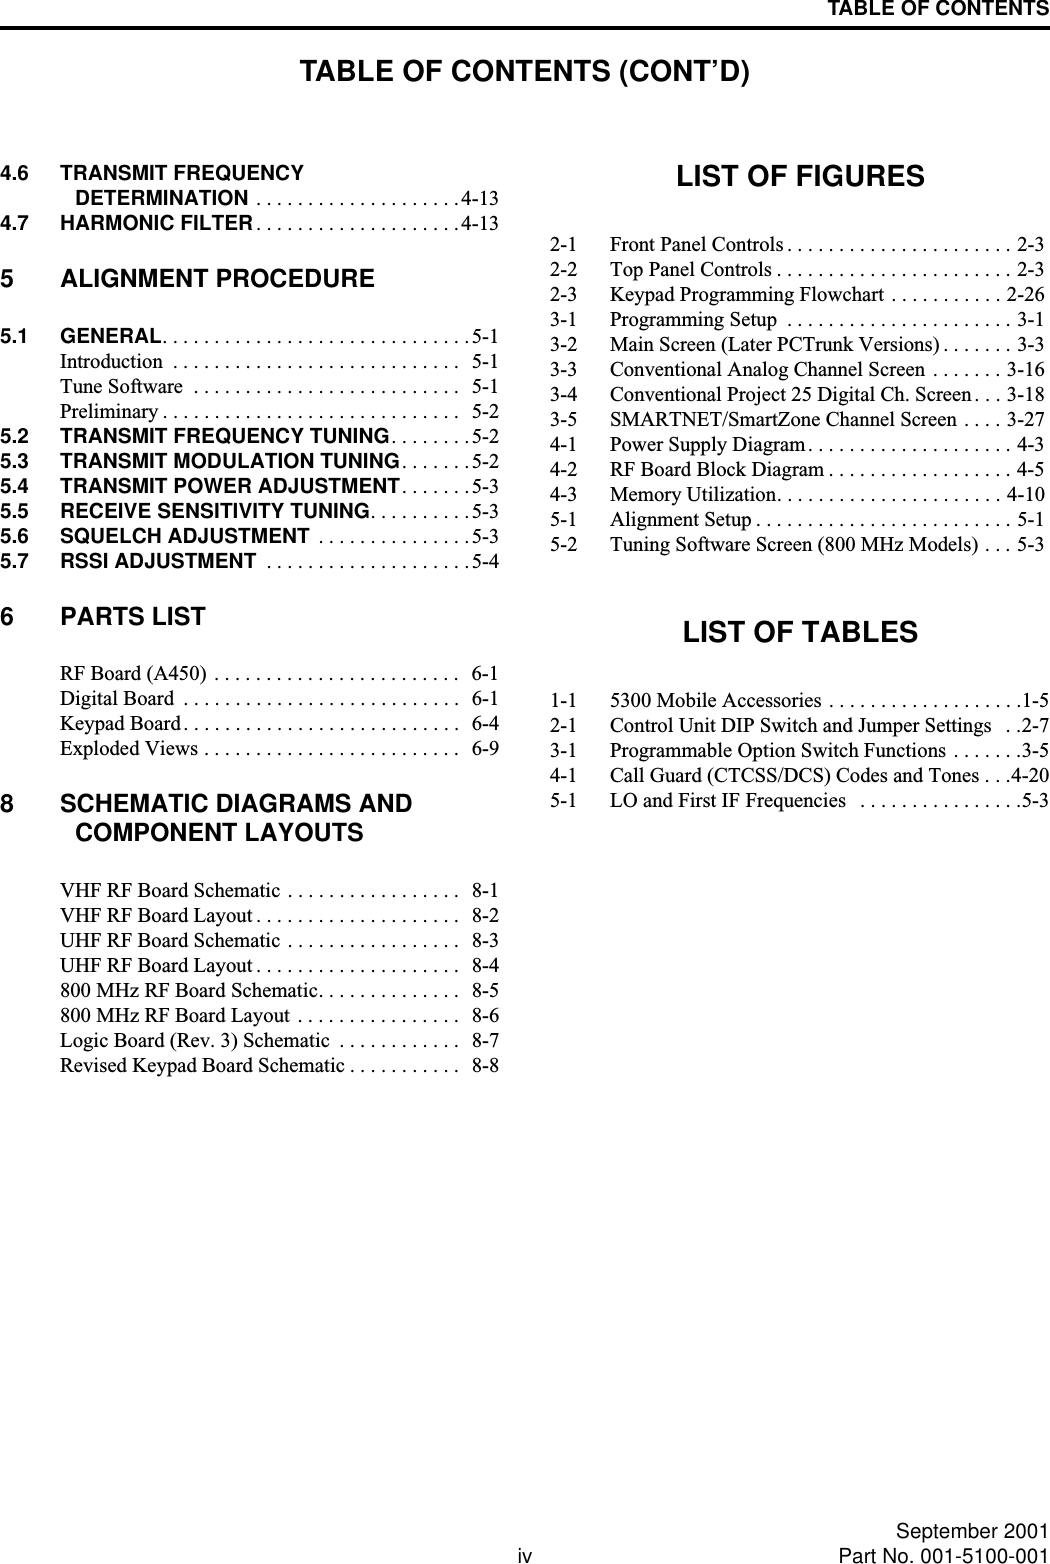 TABLE OF CONTENTS (CONT’D)TABLE OF CONTENTSiv September 2001Part No. 001-5100-0014.6 TRANSMIT FREQUENCYDETERMINATION . . . . . . . . . . . . . . . . . . . .4-134.7 HARMONIC FILTER. . . . . . . . . . . . . . . . . . . .4-135 ALIGNMENT PROCEDURE5.1 GENERAL. . . . . . . . . . . . . . . . . . . . . . . . . . . . . .5-1Introduction  . . . . . . . . . . . . . . . . . . . . . . . . . . . .  5-1Tune Software  . . . . . . . . . . . . . . . . . . . . . . . . . .  5-1Preliminary . . . . . . . . . . . . . . . . . . . . . . . . . . . . .  5-25.2 TRANSMIT FREQUENCY TUNING. . . . . . . .5-25.3 TRANSMIT MODULATION TUNING. . . . . . .5-25.4 TRANSMIT POWER ADJUSTMENT. . . . . . .5-35.5 RECEIVE SENSITIVITY TUNING. . . . . . . . . .5-35.6 SQUELCH ADJUSTMENT  . . . . . . . . . . . . . . .5-35.7 RSSI ADJUSTMENT  . . . . . . . . . . . . . . . . . . . .5-46 PARTS LISTRF Board (A450) . . . . . . . . . . . . . . . . . . . . . . . .  6-1Digital Board  . . . . . . . . . . . . . . . . . . . . . . . . . . .  6-1Keypad Board. . . . . . . . . . . . . . . . . . . . . . . . . . .  6-4Exploded Views . . . . . . . . . . . . . . . . . . . . . . . . .  6-98 SCHEMATIC DIAGRAMS ANDCOMPONENT LAYOUTSVHF RF Board Schematic . . . . . . . . . . . . . . . . .  8-1VHF RF Board Layout . . . . . . . . . . . . . . . . . . . .  8-2UHF RF Board Schematic . . . . . . . . . . . . . . . . .  8-3UHF RF Board Layout . . . . . . . . . . . . . . . . . . . .  8-4800 MHz RF Board Schematic. . . . . . . . . . . . . .  8-5800 MHz RF Board Layout  . . . . . . . . . . . . . . . .  8-6Logic Board (Rev. 3) Schematic  . . . . . . . . . . . .  8-7Revised Keypad Board Schematic . . . . . . . . . . .  8-8LIST OF FIGURES2-1 Front Panel Controls . . . . . . . . . . . . . . . . . . . . . . 2-32-2 Top Panel Controls . . . . . . . . . . . . . . . . . . . . . . . 2-32-3 Keypad Programming Flowchart . . . . . . . . . . . 2-263-1 Programming Setup  . . . . . . . . . . . . . . . . . . . . . . 3-13-2 Main Screen (Later PCTrunk Versions) . . . . . . . 3-33-3 Conventional Analog Channel Screen . . . . . . . 3-163-4 Conventional Project 25 Digital Ch. Screen . . . 3-183-5 SMARTNET/SmartZone Channel Screen . . . . 3-274-1 Power Supply Diagram. . . . . . . . . . . . . . . . . . . . 4-34-2 RF Board Block Diagram . . . . . . . . . . . . . . . . . . 4-54-3 Memory Utilization. . . . . . . . . . . . . . . . . . . . . . 4-105-1 Alignment Setup . . . . . . . . . . . . . . . . . . . . . . . . . 5-15-2 Tuning Software Screen (800 MHz Models) . . . 5-3LIST OF TABLES1-1 5300 Mobile Accessories . . . . . . . . . . . . . . . . . . .1-52-1 Control Unit DIP Switch and Jumper Settings   . .2-73-1 Programmable Option Switch Functions . . . . . . .3-54-1 Call Guard (CTCSS/DCS) Codes and Tones . . .4-205-1 LO and First IF Frequencies   . . . . . . . . . . . . . . . .5-3